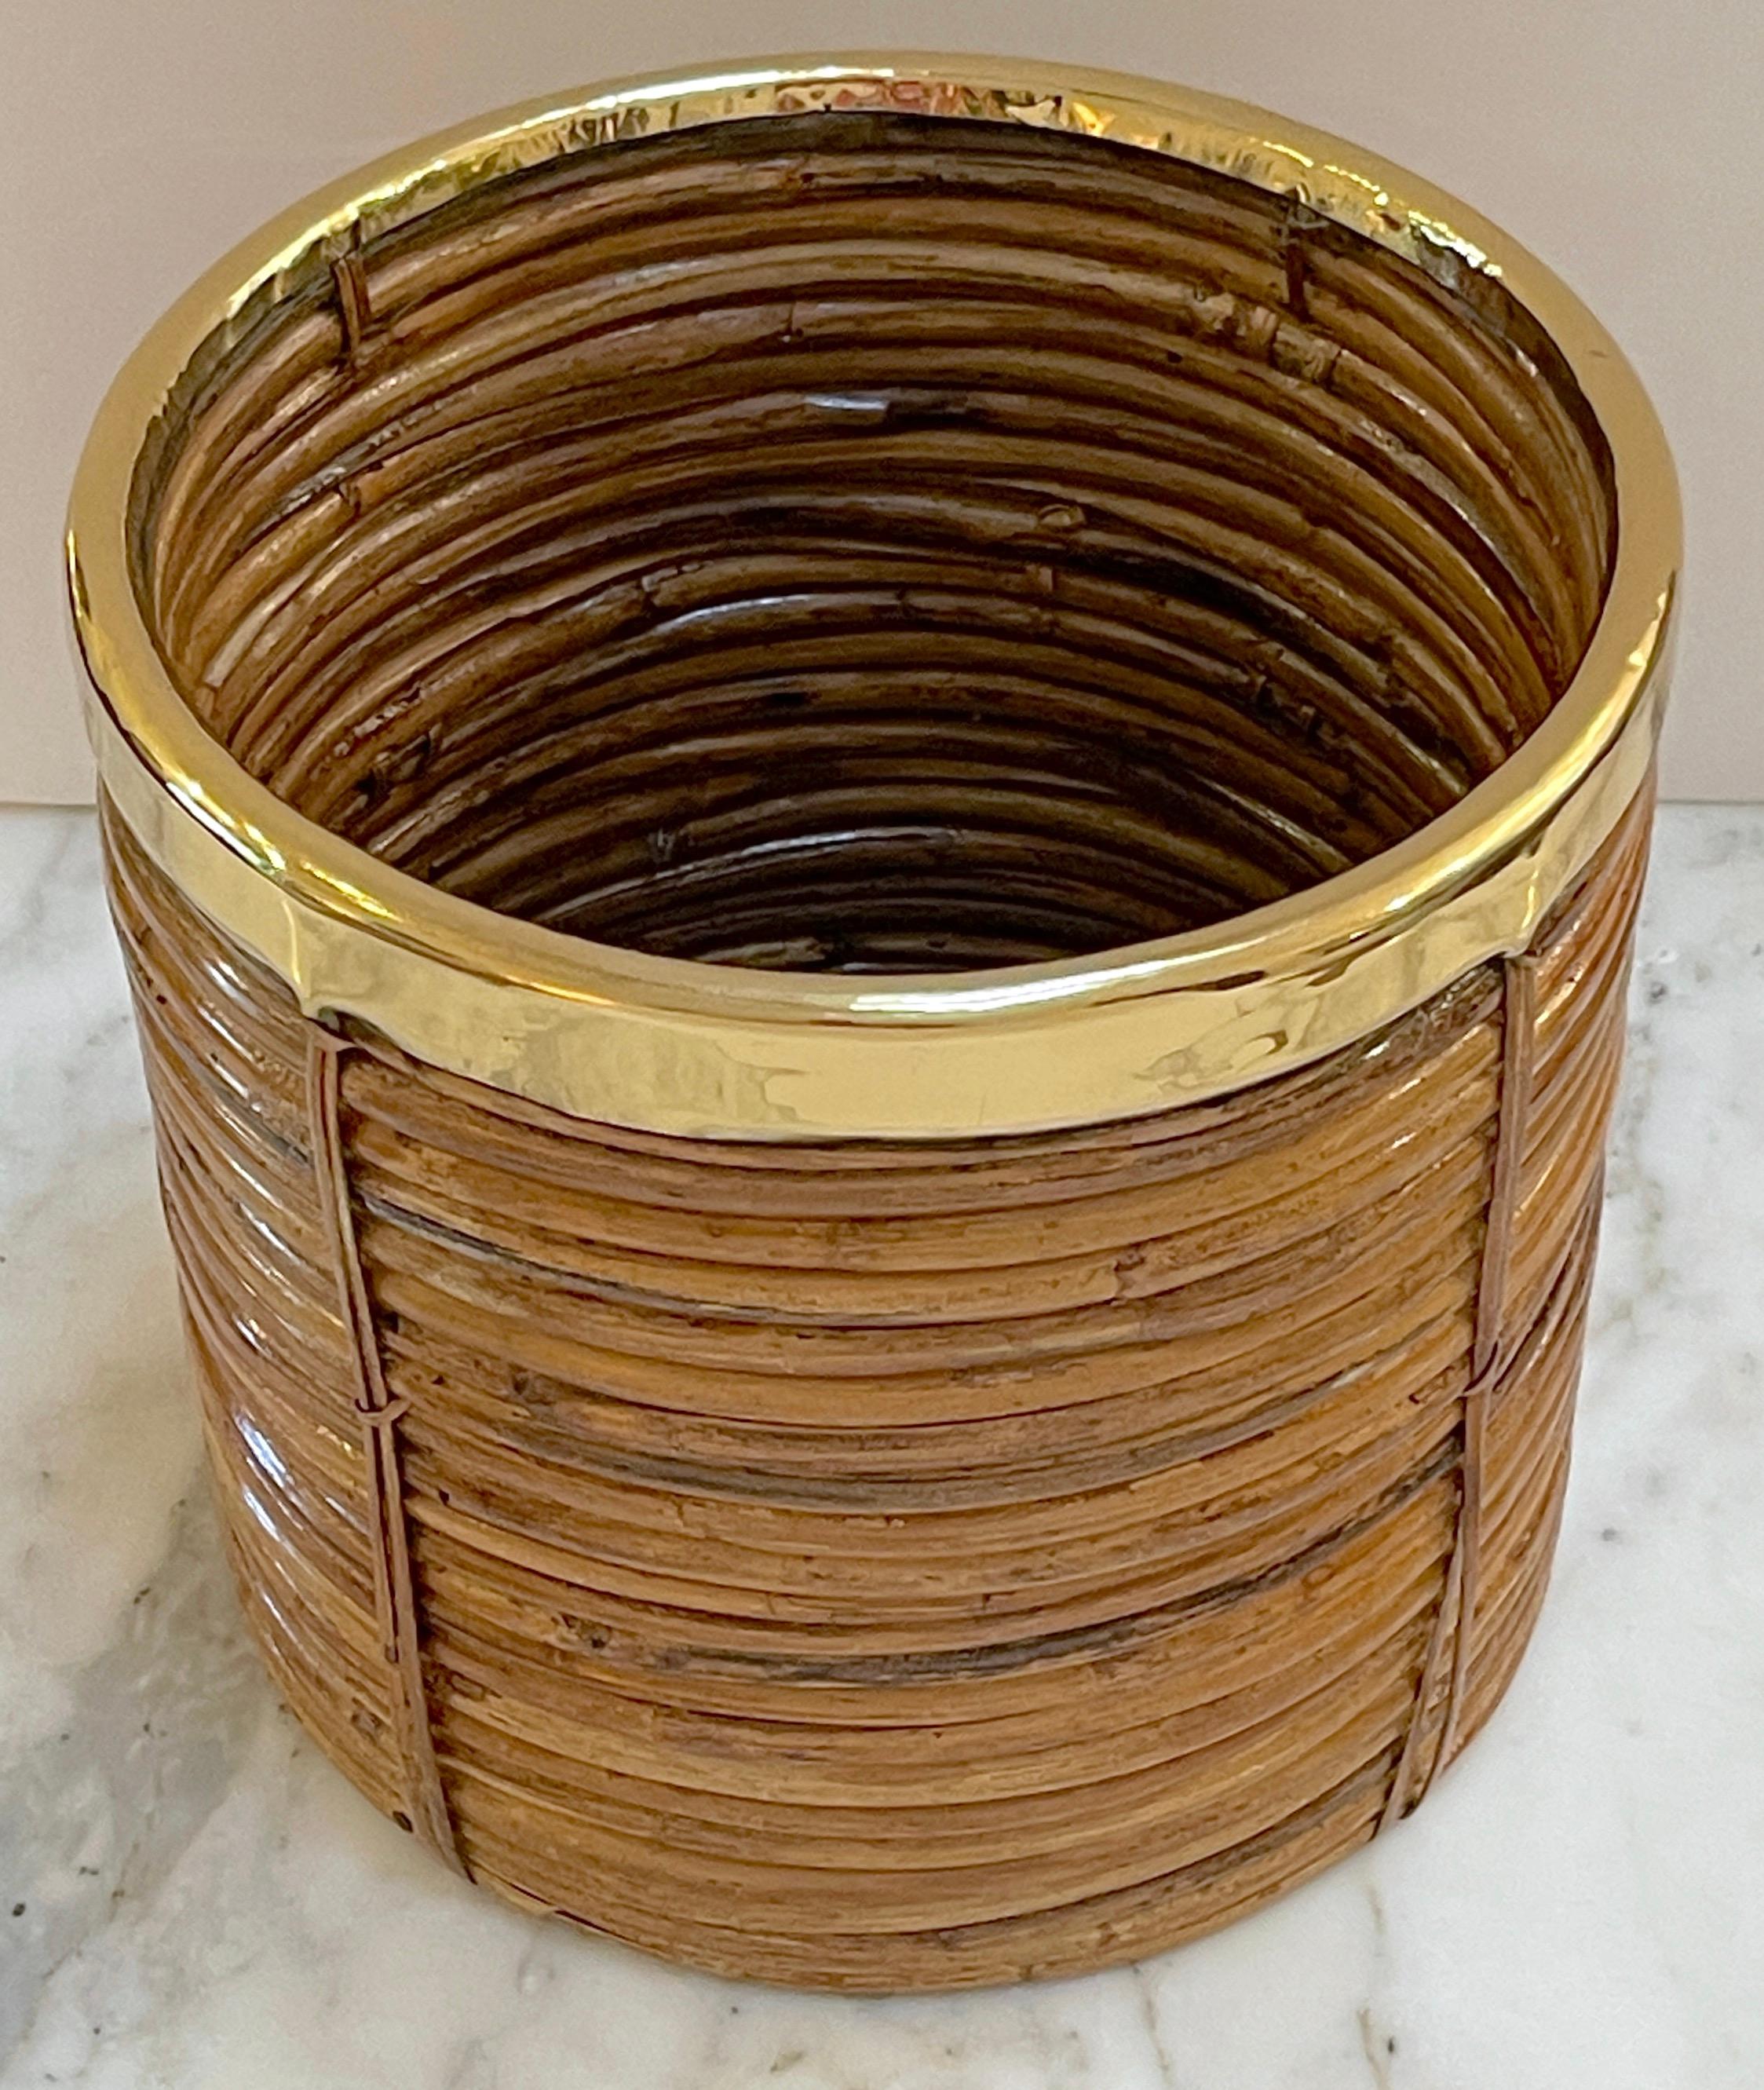 1970s Italian bamboo/ rattan wastepaper basket with polished brass rim
Mid-Century Modern decorative bamboo, rattan and brass Wastepaper basket. basket. Handcrafted in Italy, 1970s. Round in shape with professionally polished brass rim. Inspired on